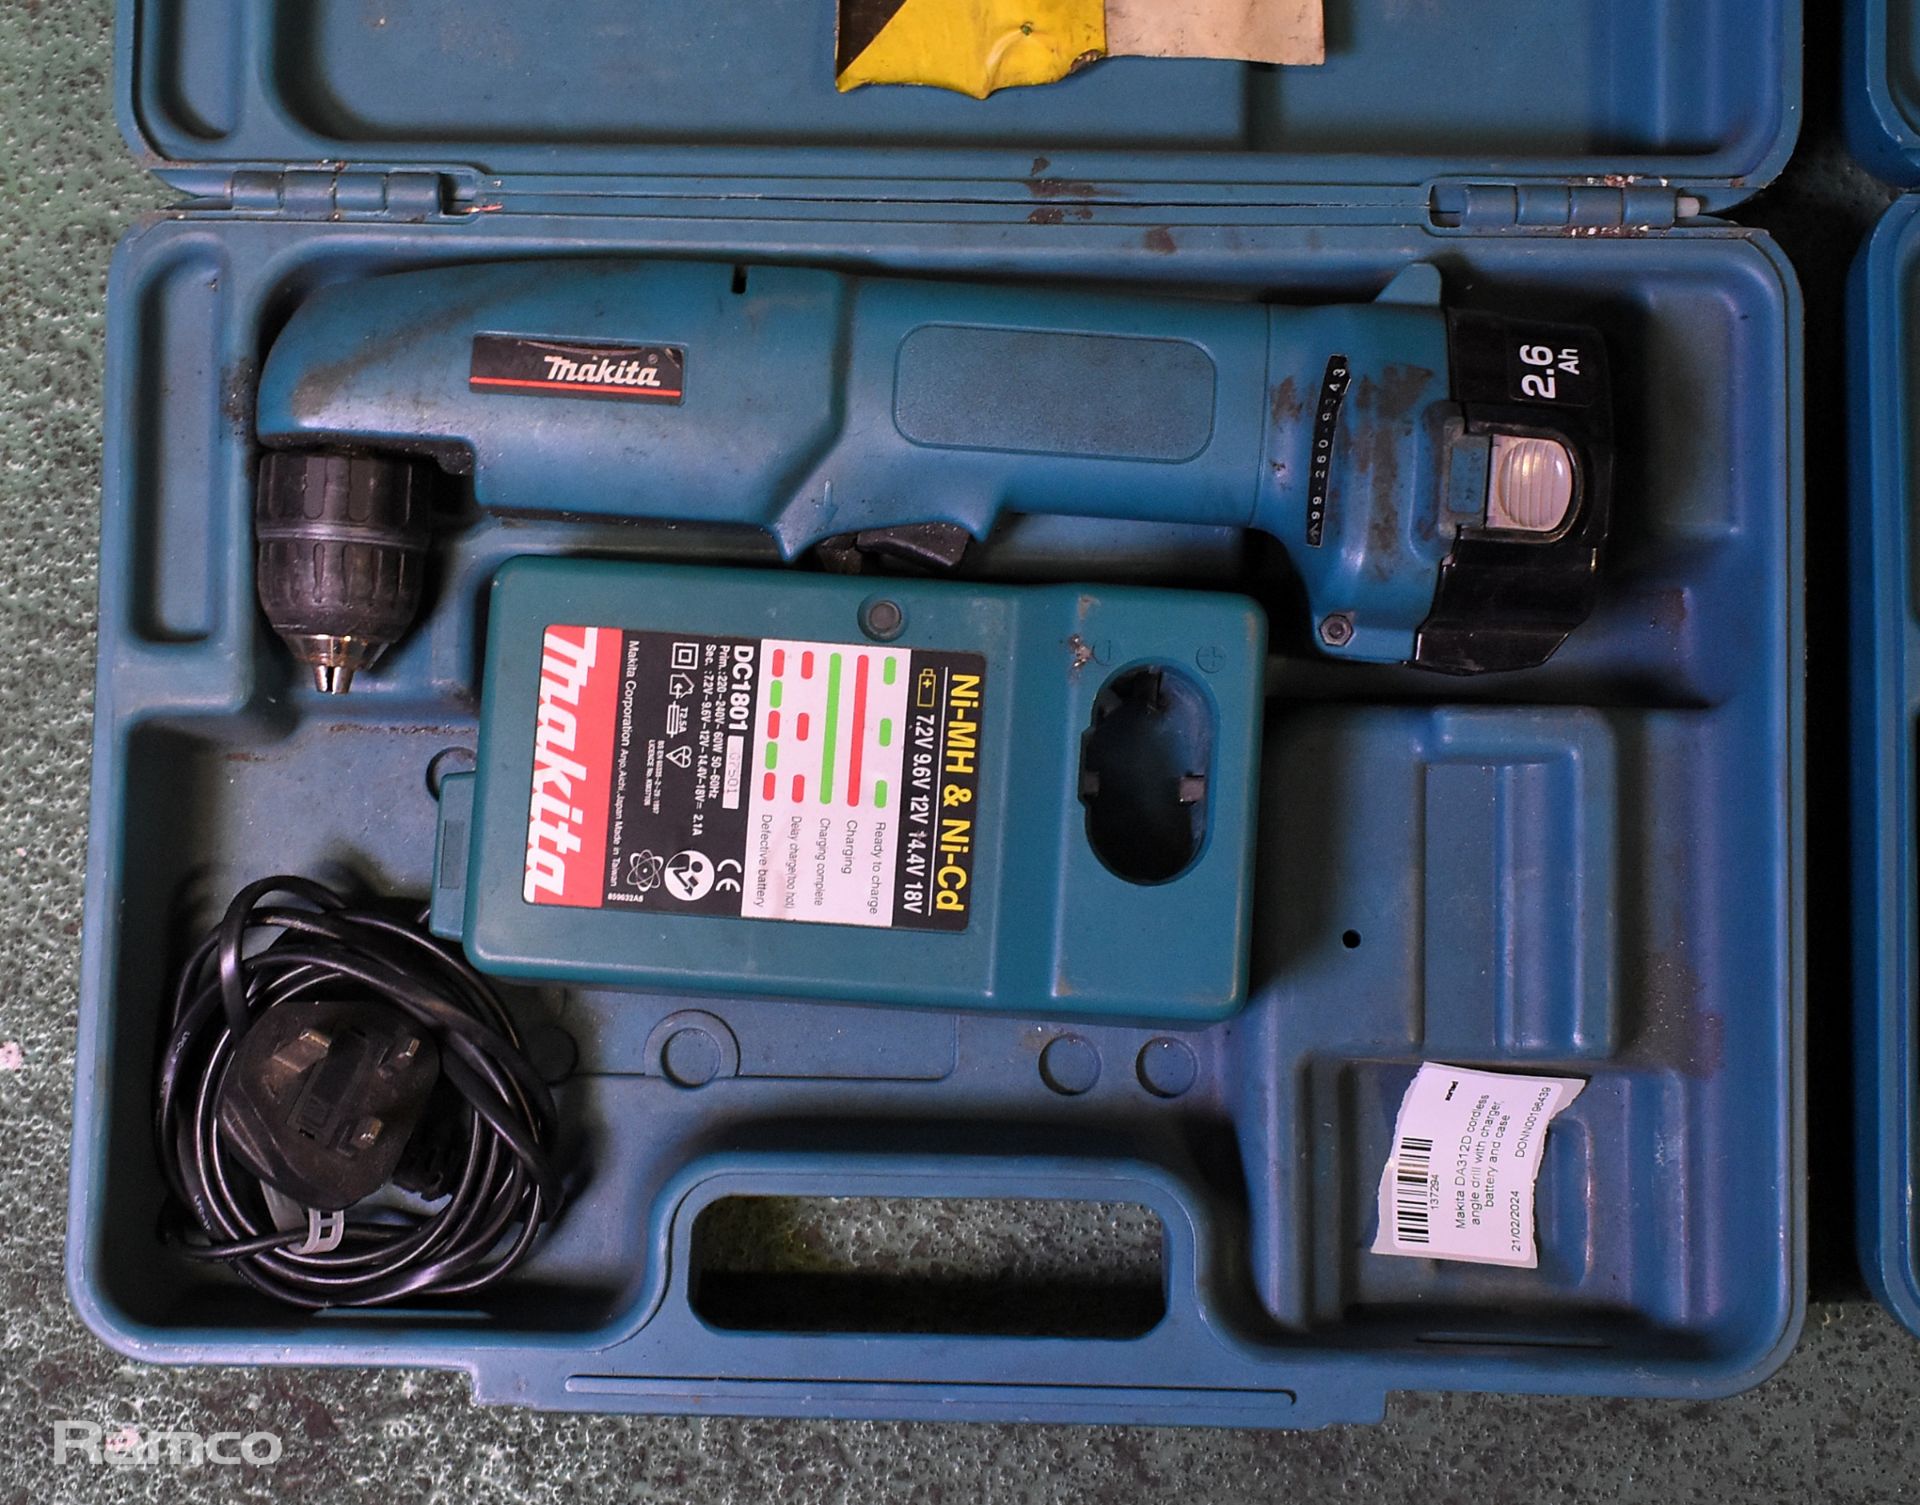 2x Makita DA312D cordless angle drill with charger, battery and case - Image 2 of 9